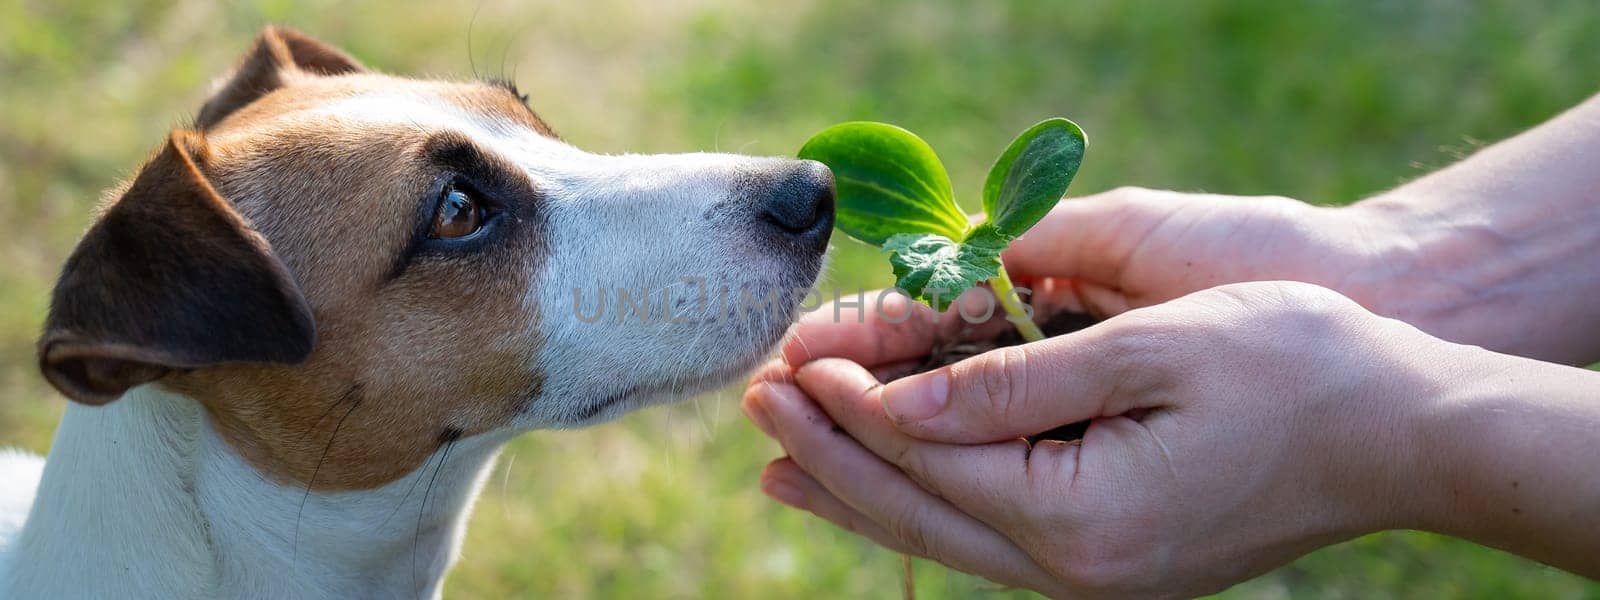 A woman holds a sprout in her hands next to the muzzle of a Jack Russell dog outdoors